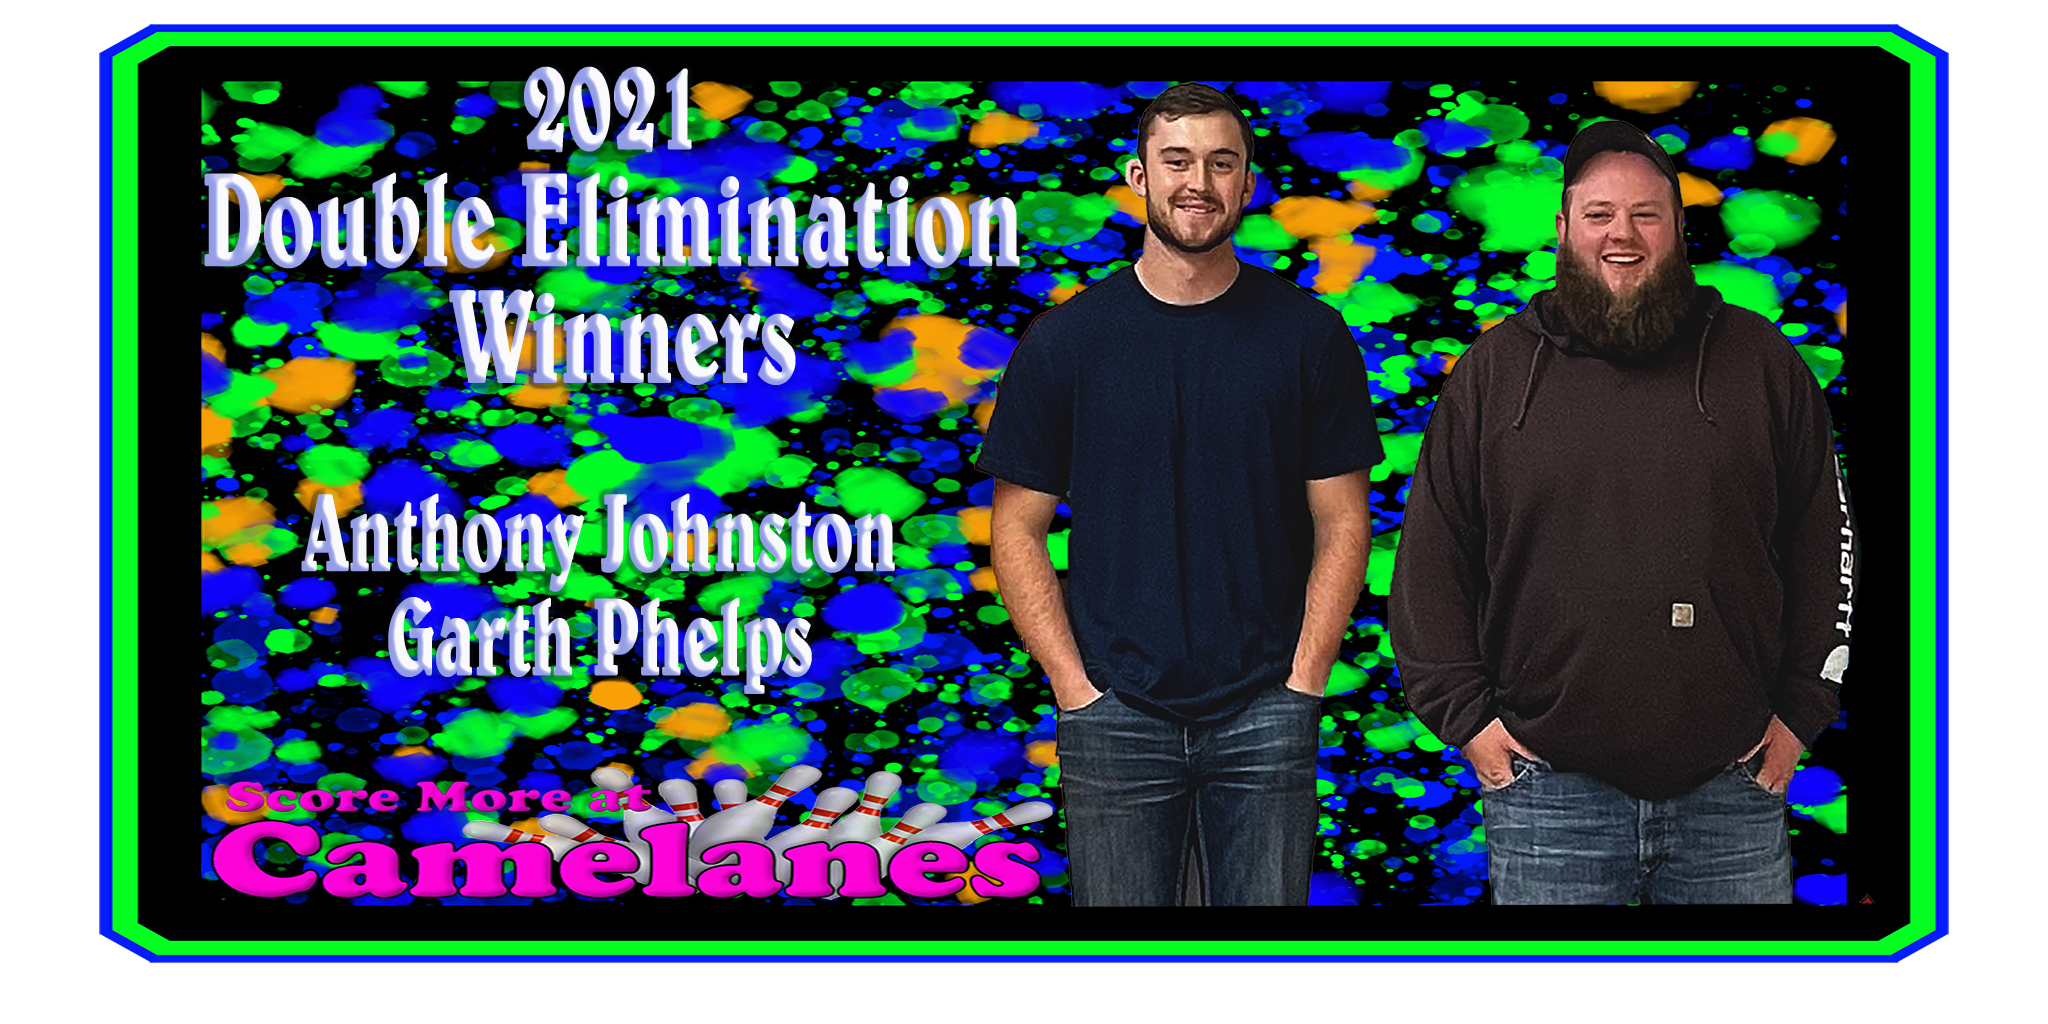 Camelanes Bowling Center 2021 Double Elimination Winners